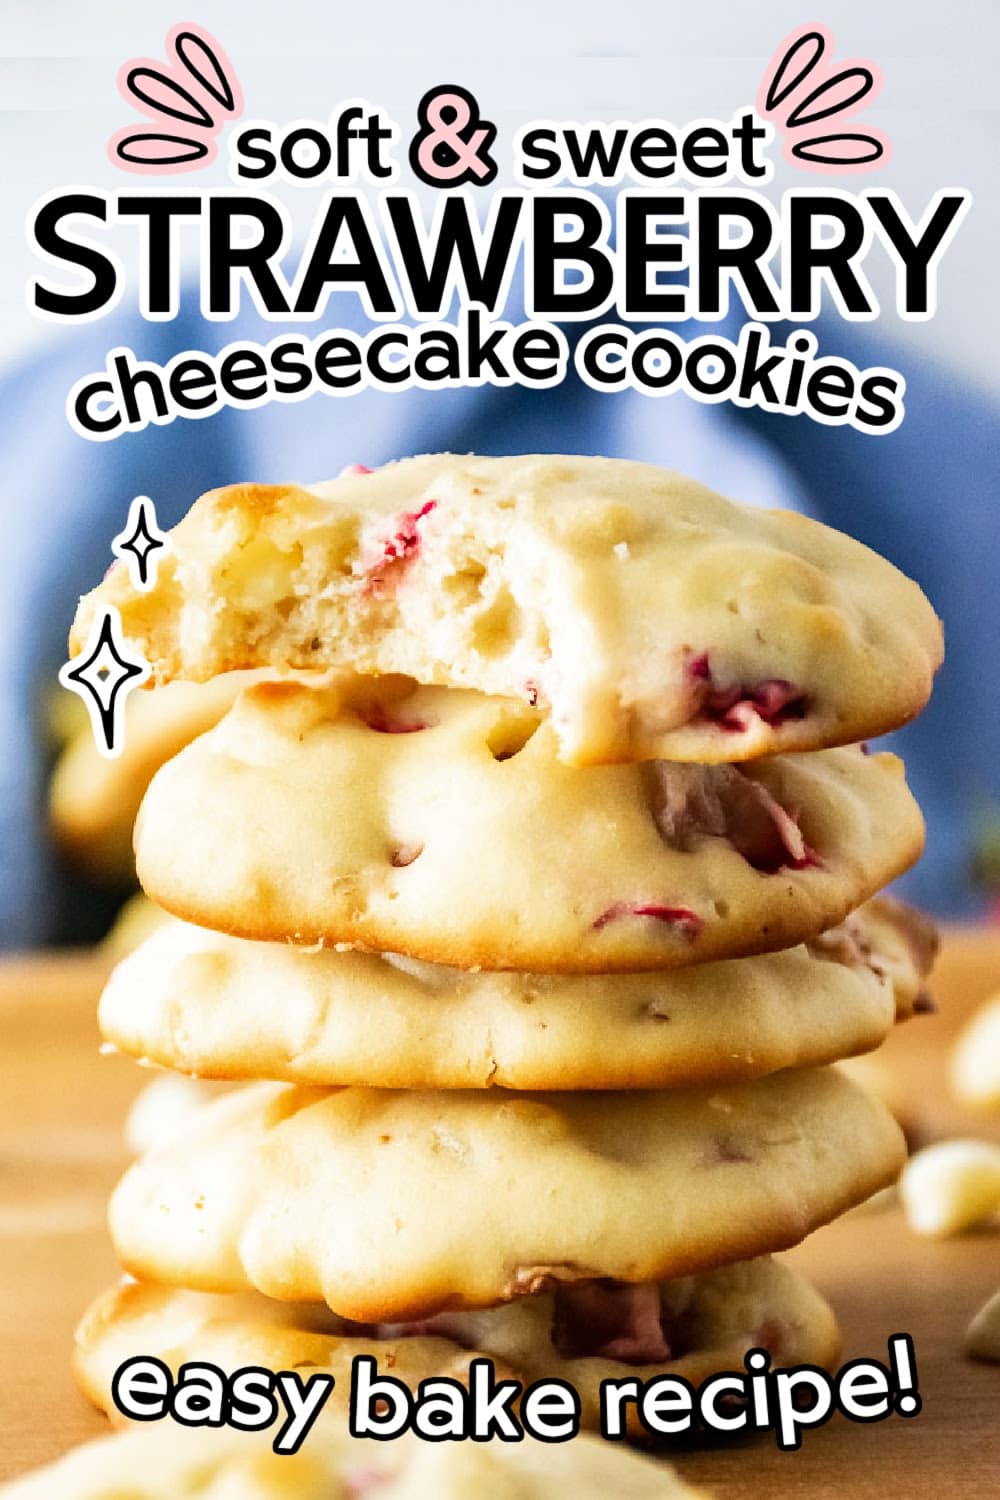 Stack of strawberry cheesecake cookies with a bite taken from the top one with text overlay.